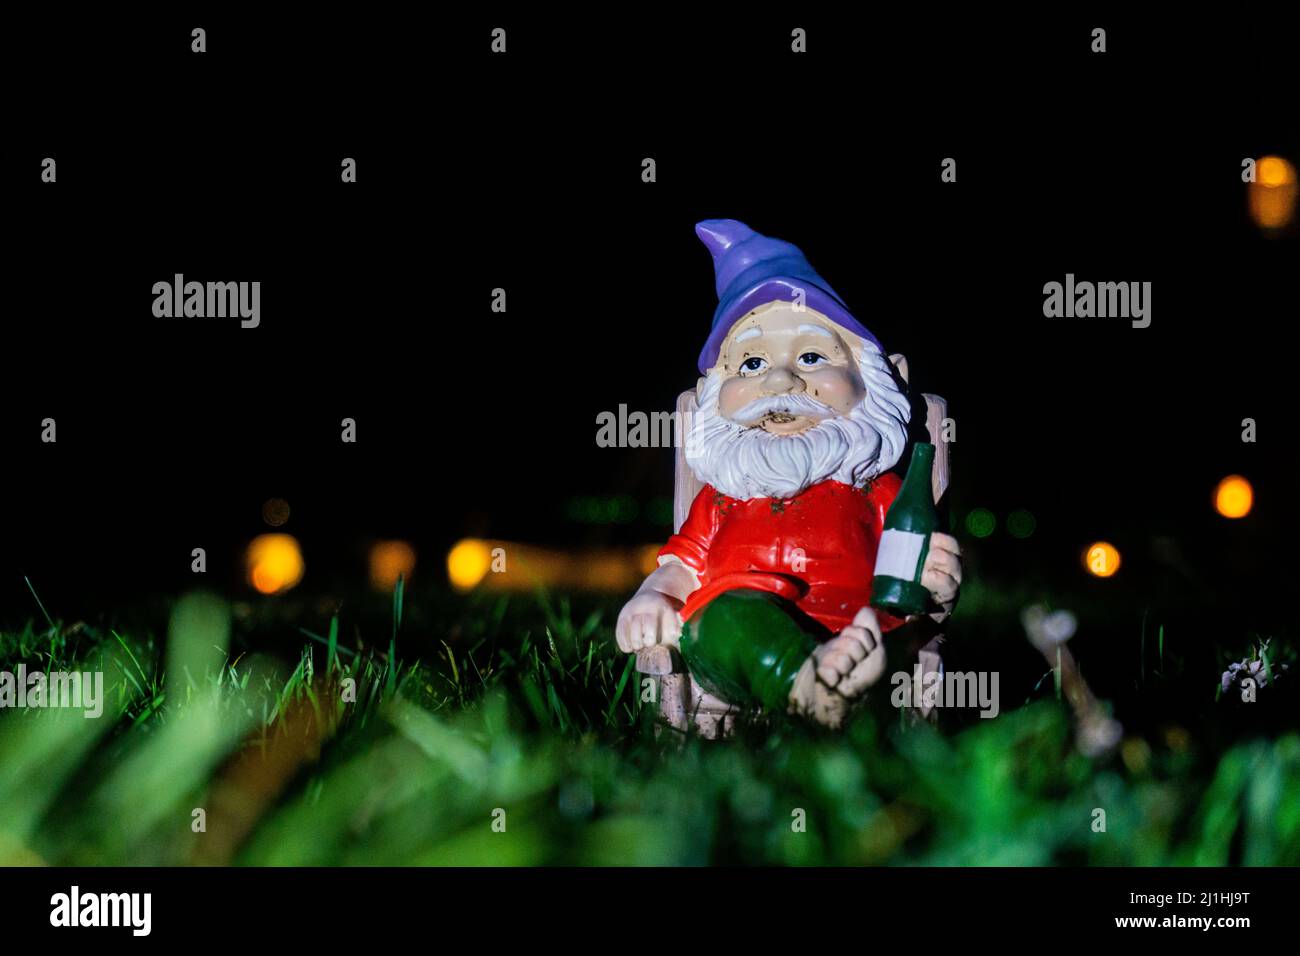 Garden gnome in front of black background relaxing on top of green grass in the middle of the night. Stock Photo